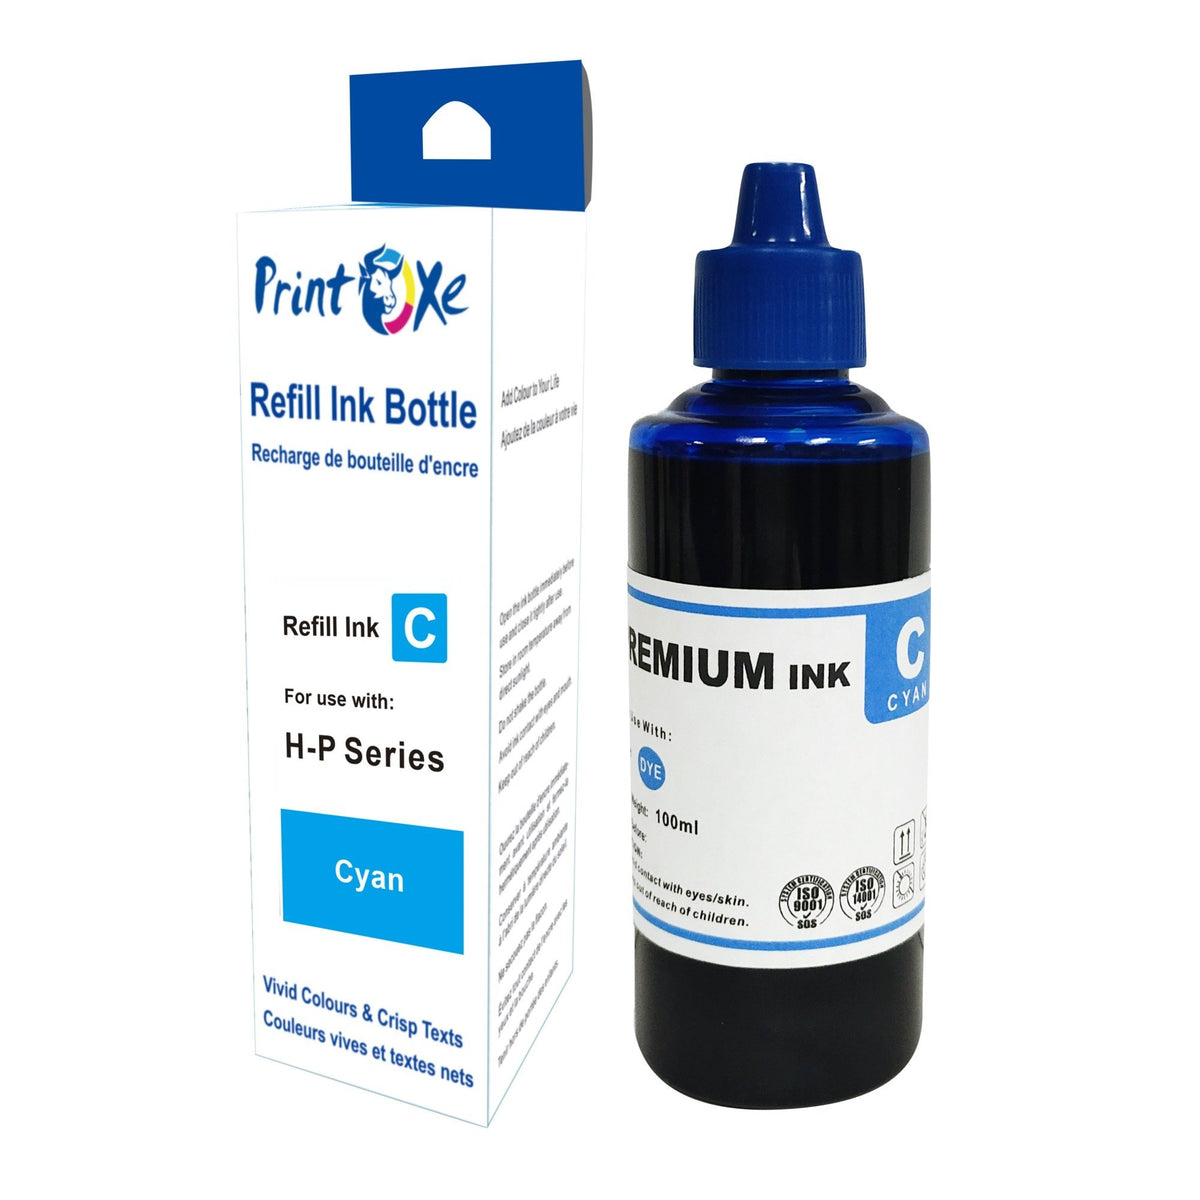 Universal Ink Refill 10 Bottles 370 of 2 Sets + 2 Black for Desktop CISS & Cartridges (Refill Kit Not Included) Canon & HP Models 61 60 62 63 64 65 950 951 564 920 901 902 952 XL and Many Others PRINTOXE Refill Bottles